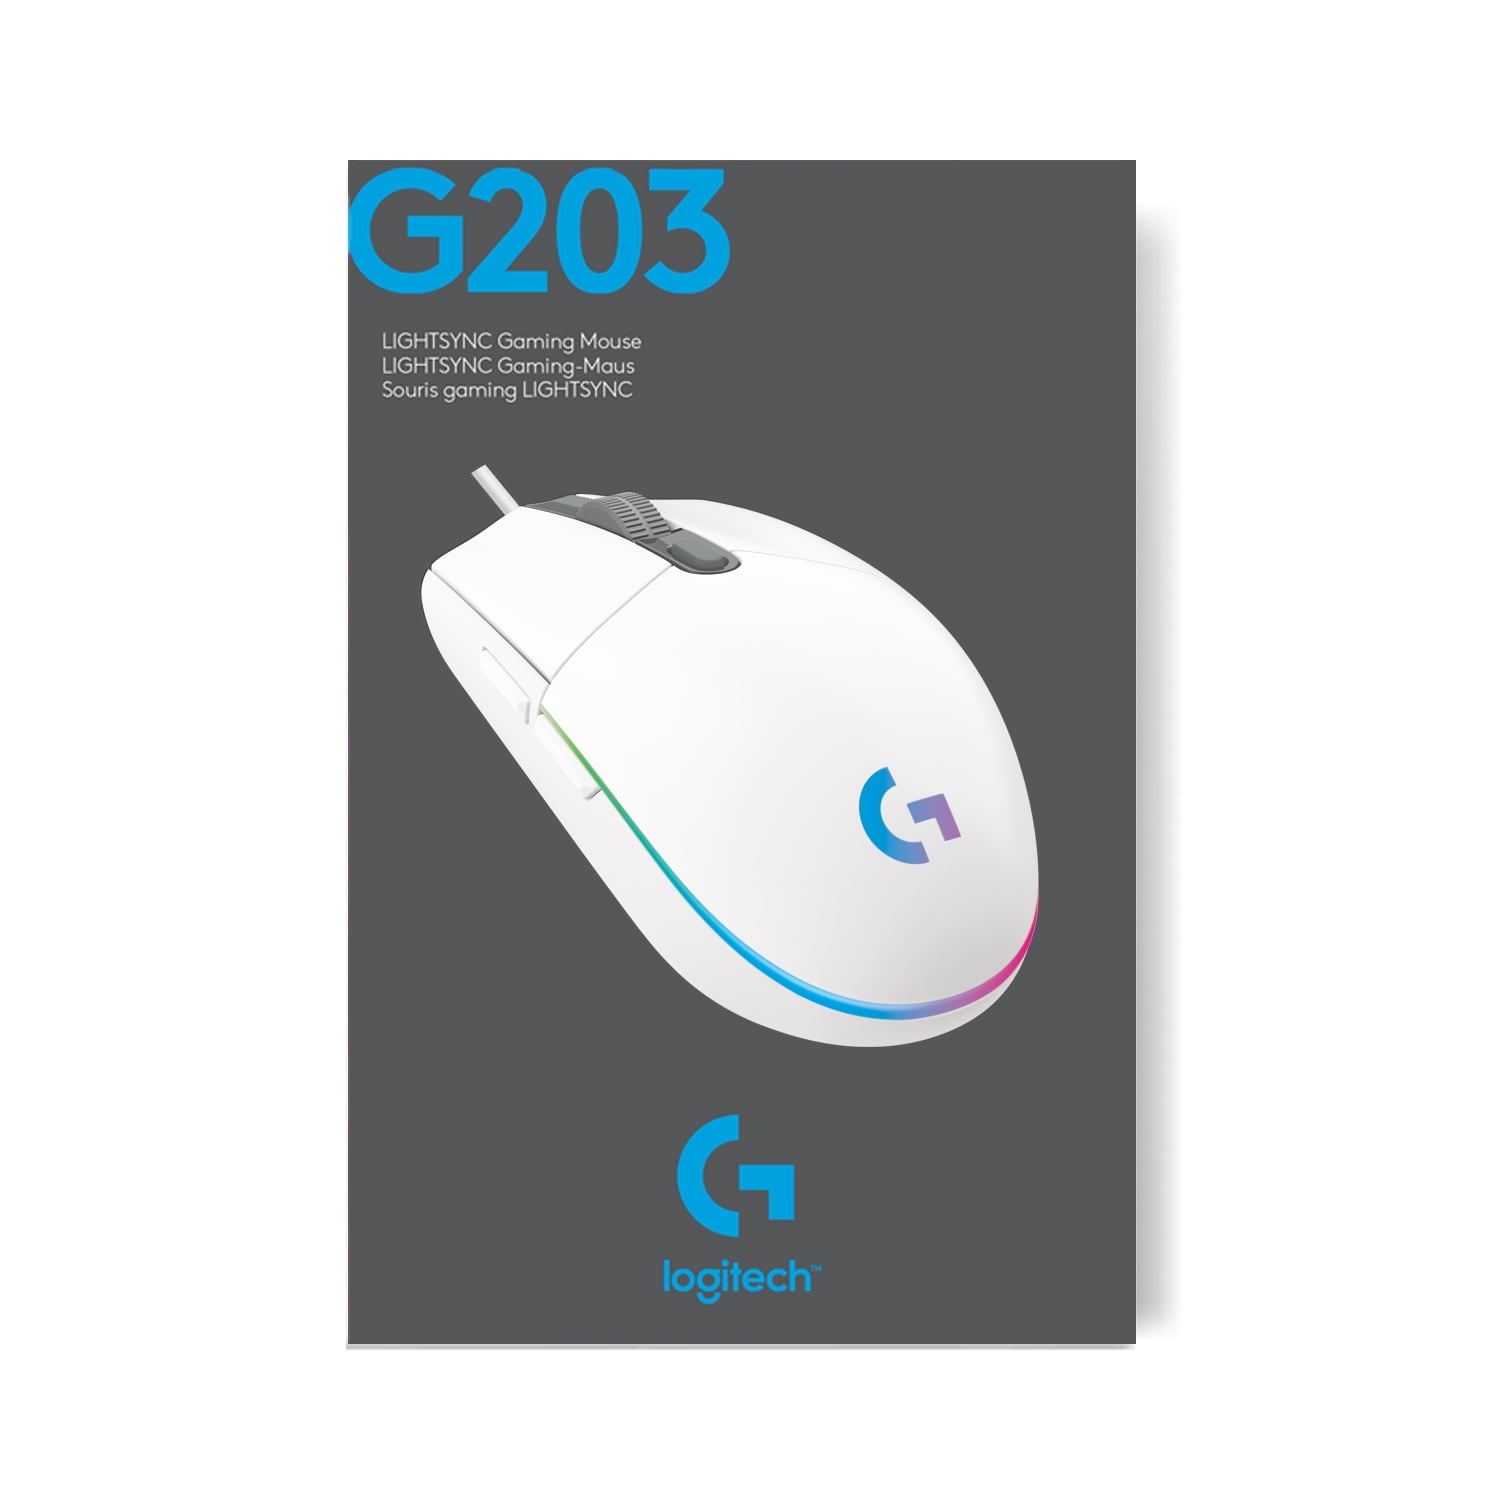 Mouse LOGITECH GAMING G203 BLUE – Compured